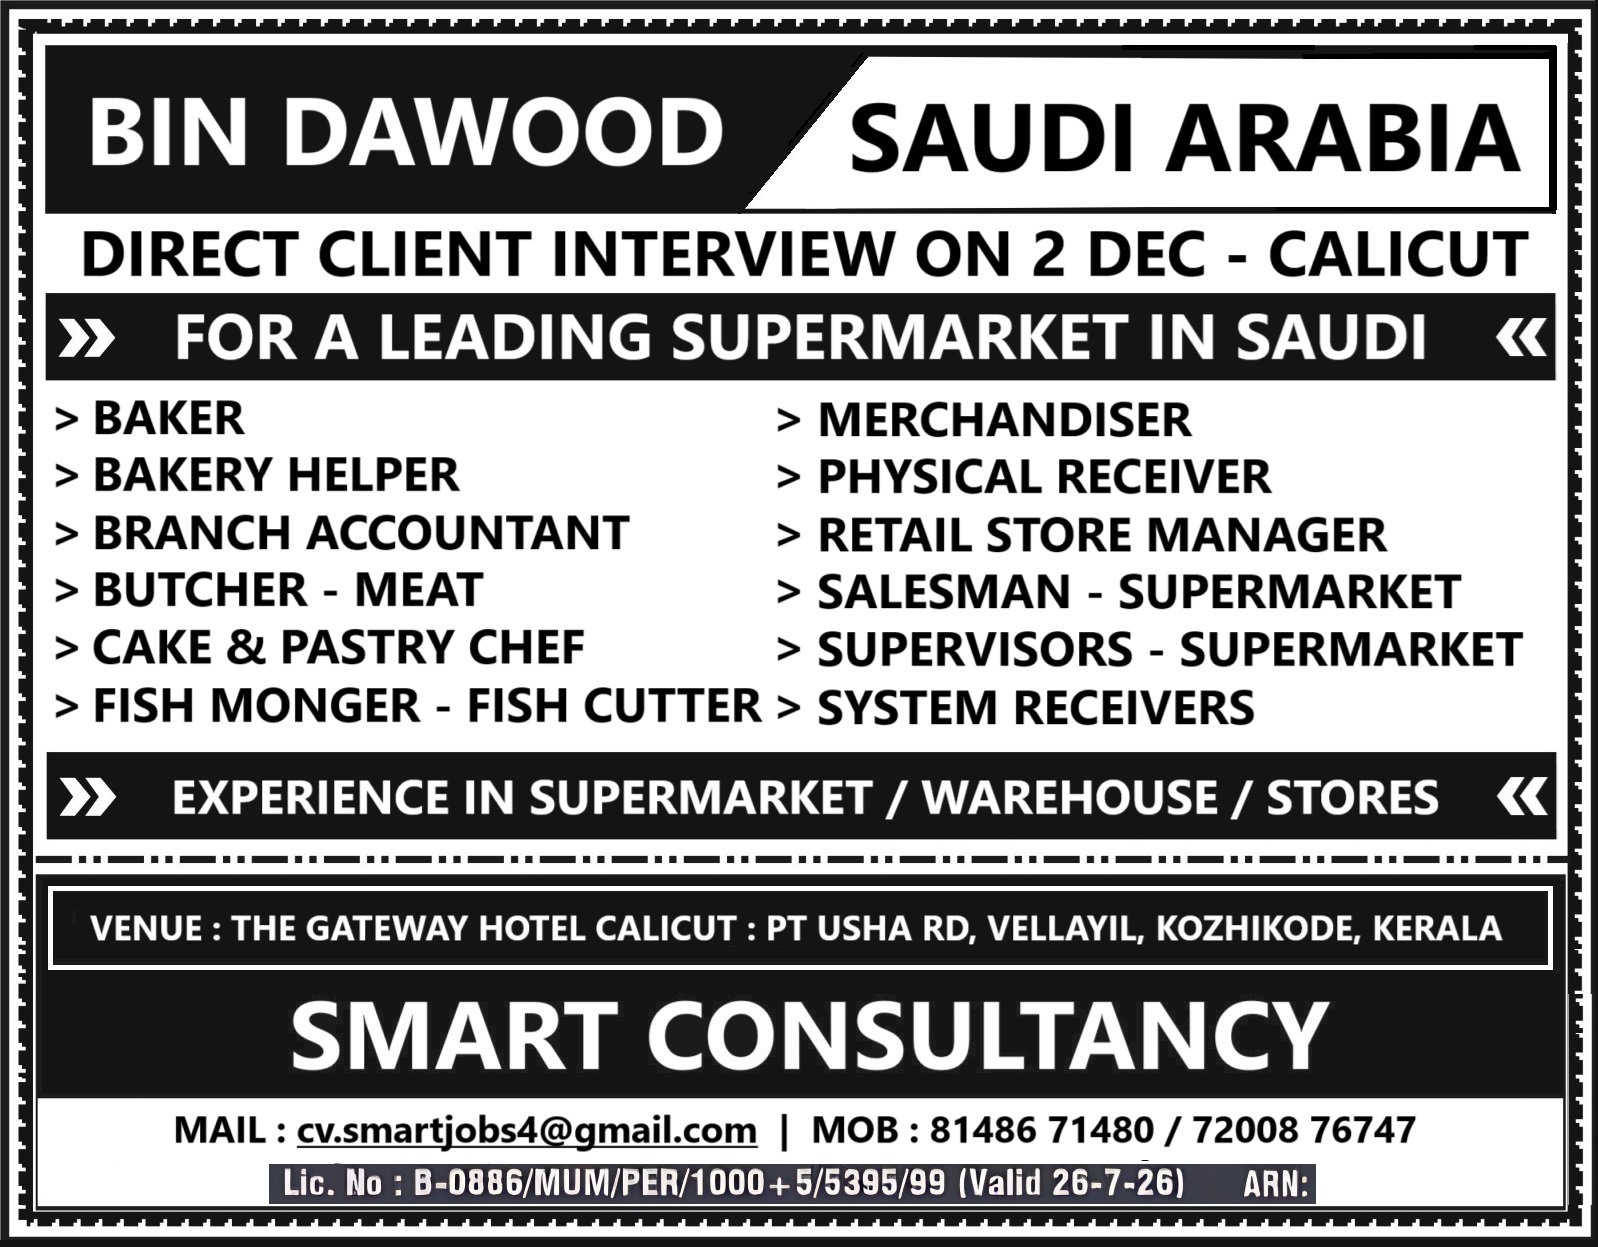   WANTED FOR A LEADING SUPERMARKET - SAUDI ARABIA / DIRECT CLIENT INTERVIEW ON 2 DEC - CALICUT 